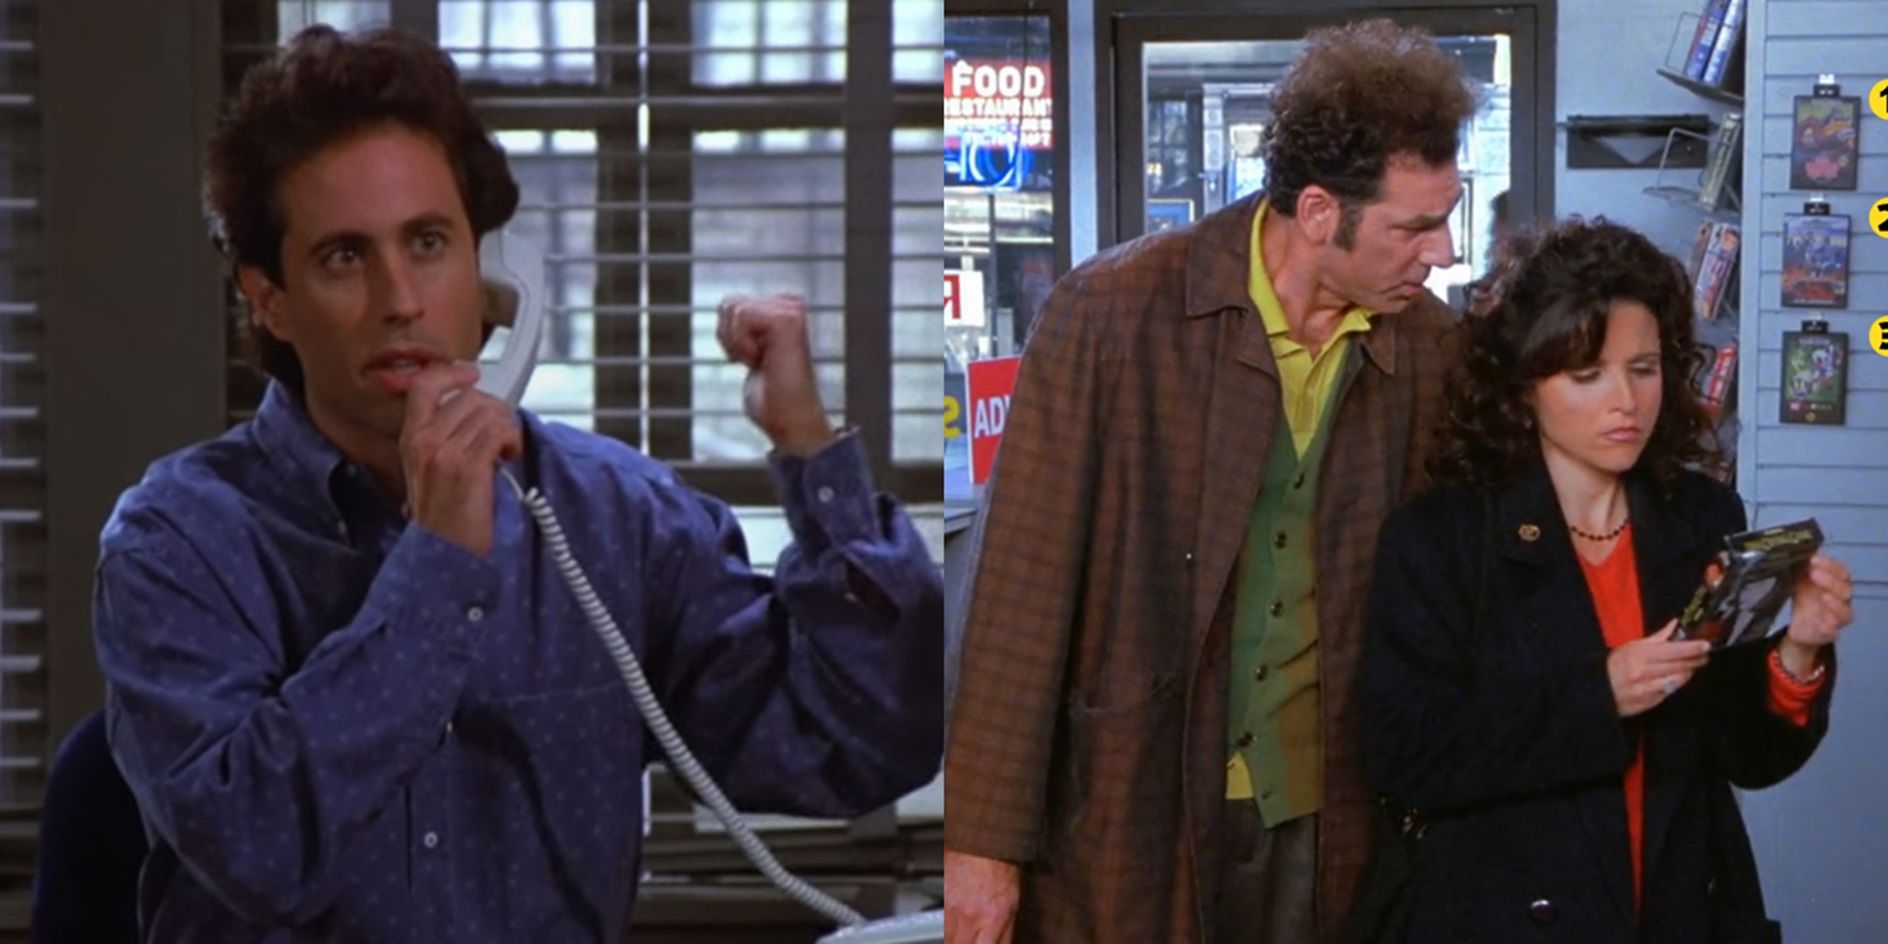 10 Tech-Based Seinfeld Storylines That Would Never Work Today